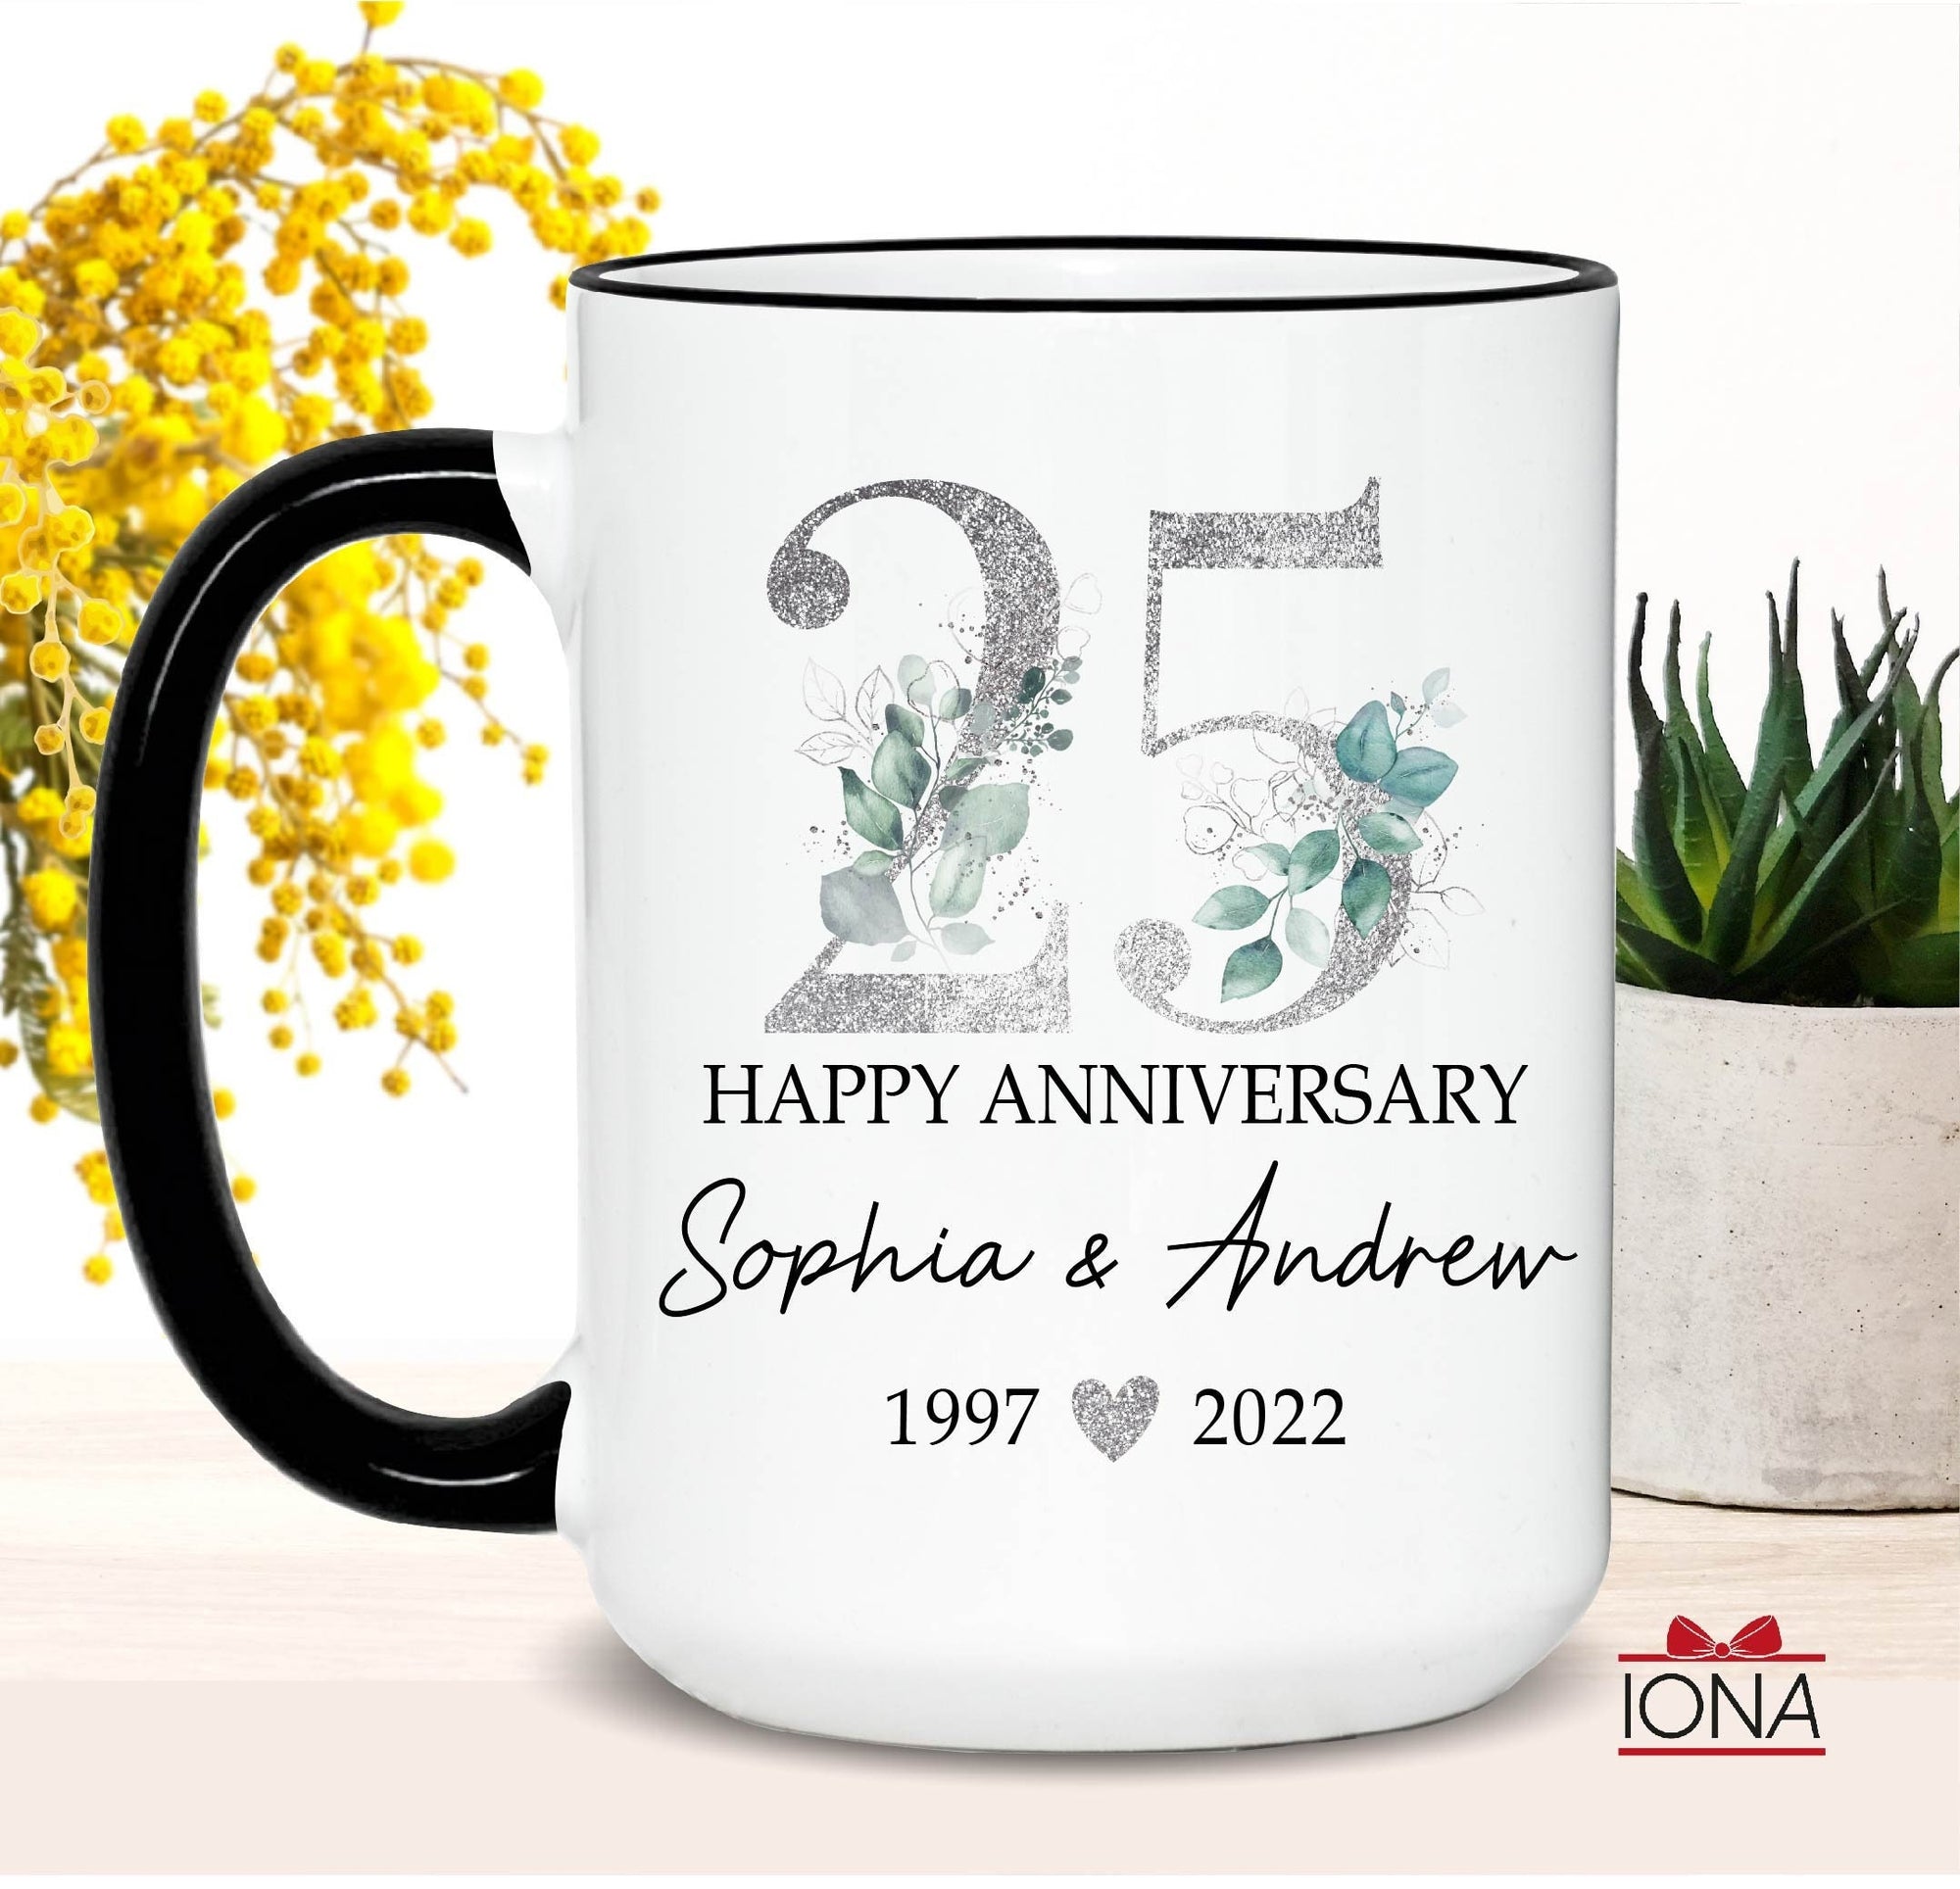 25th Anniversary gift, Personalized Anniversary gift, Gift for Husband and Wife, Custom Parent's Anniversary, Golden Anniversary Present